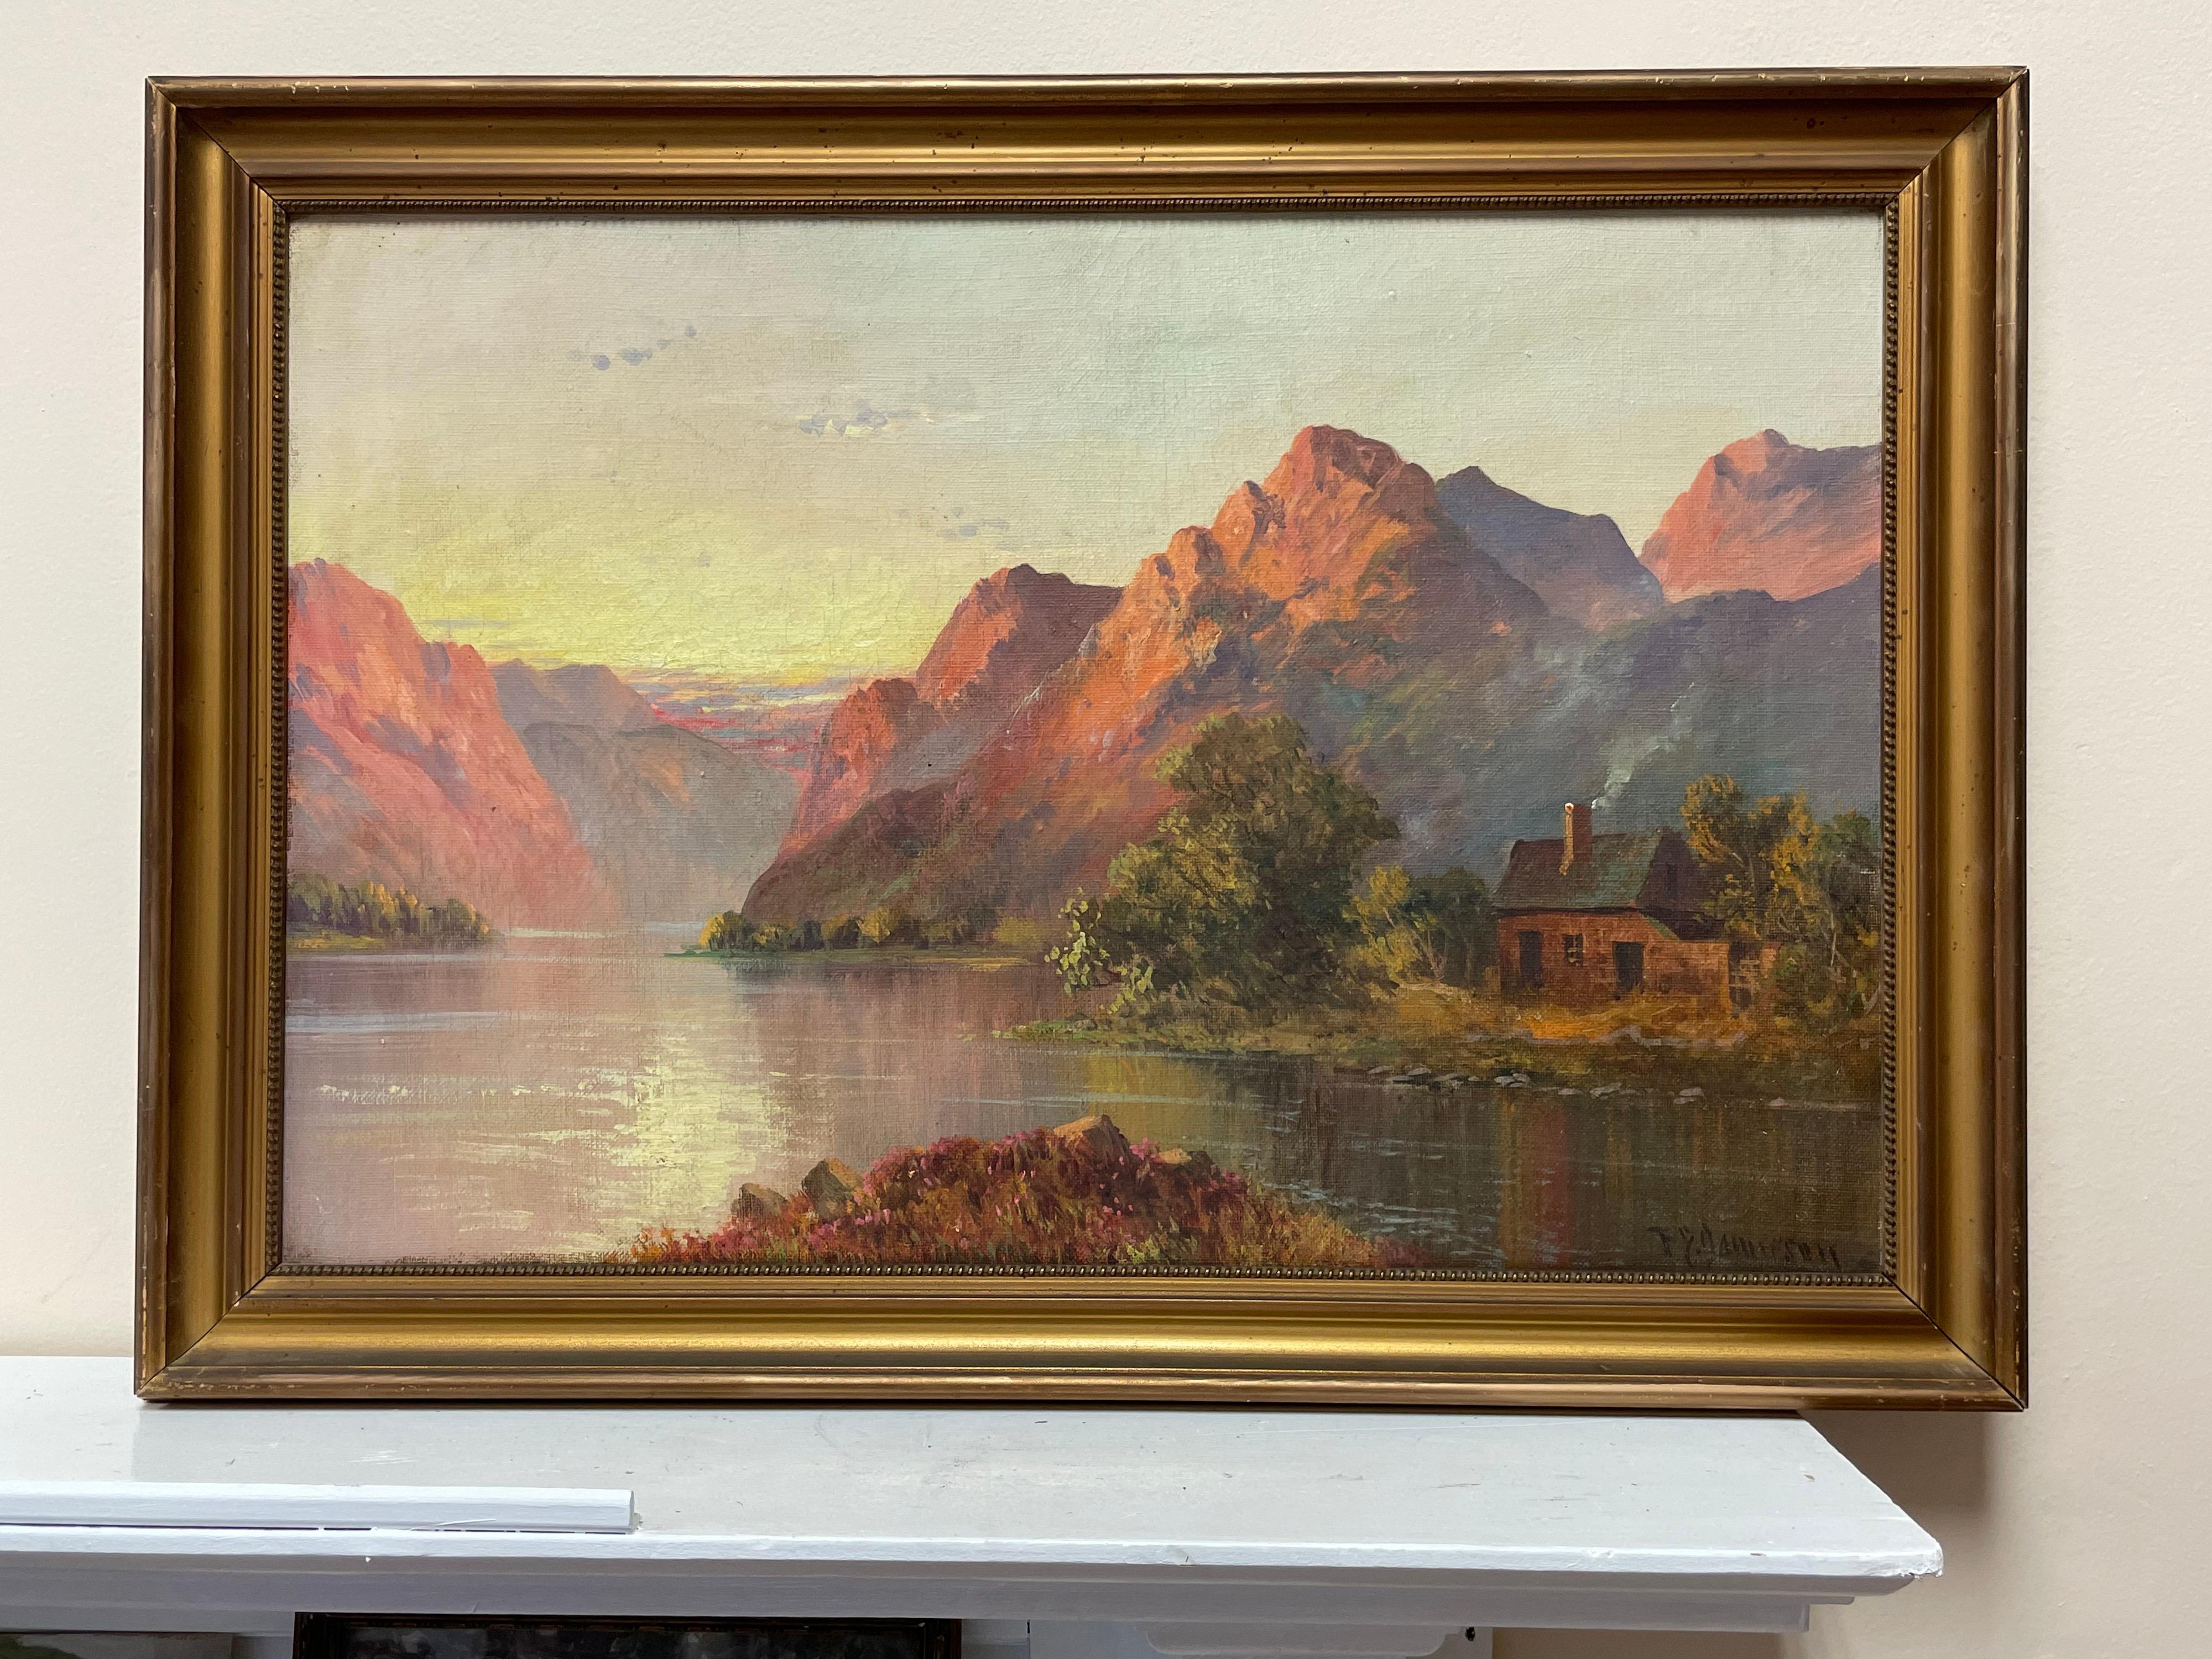 Antique Scottish Highland Loch Scene at Sunset Rugged Mountains & Loch Cottage - Painting by Francis E. Jamieson